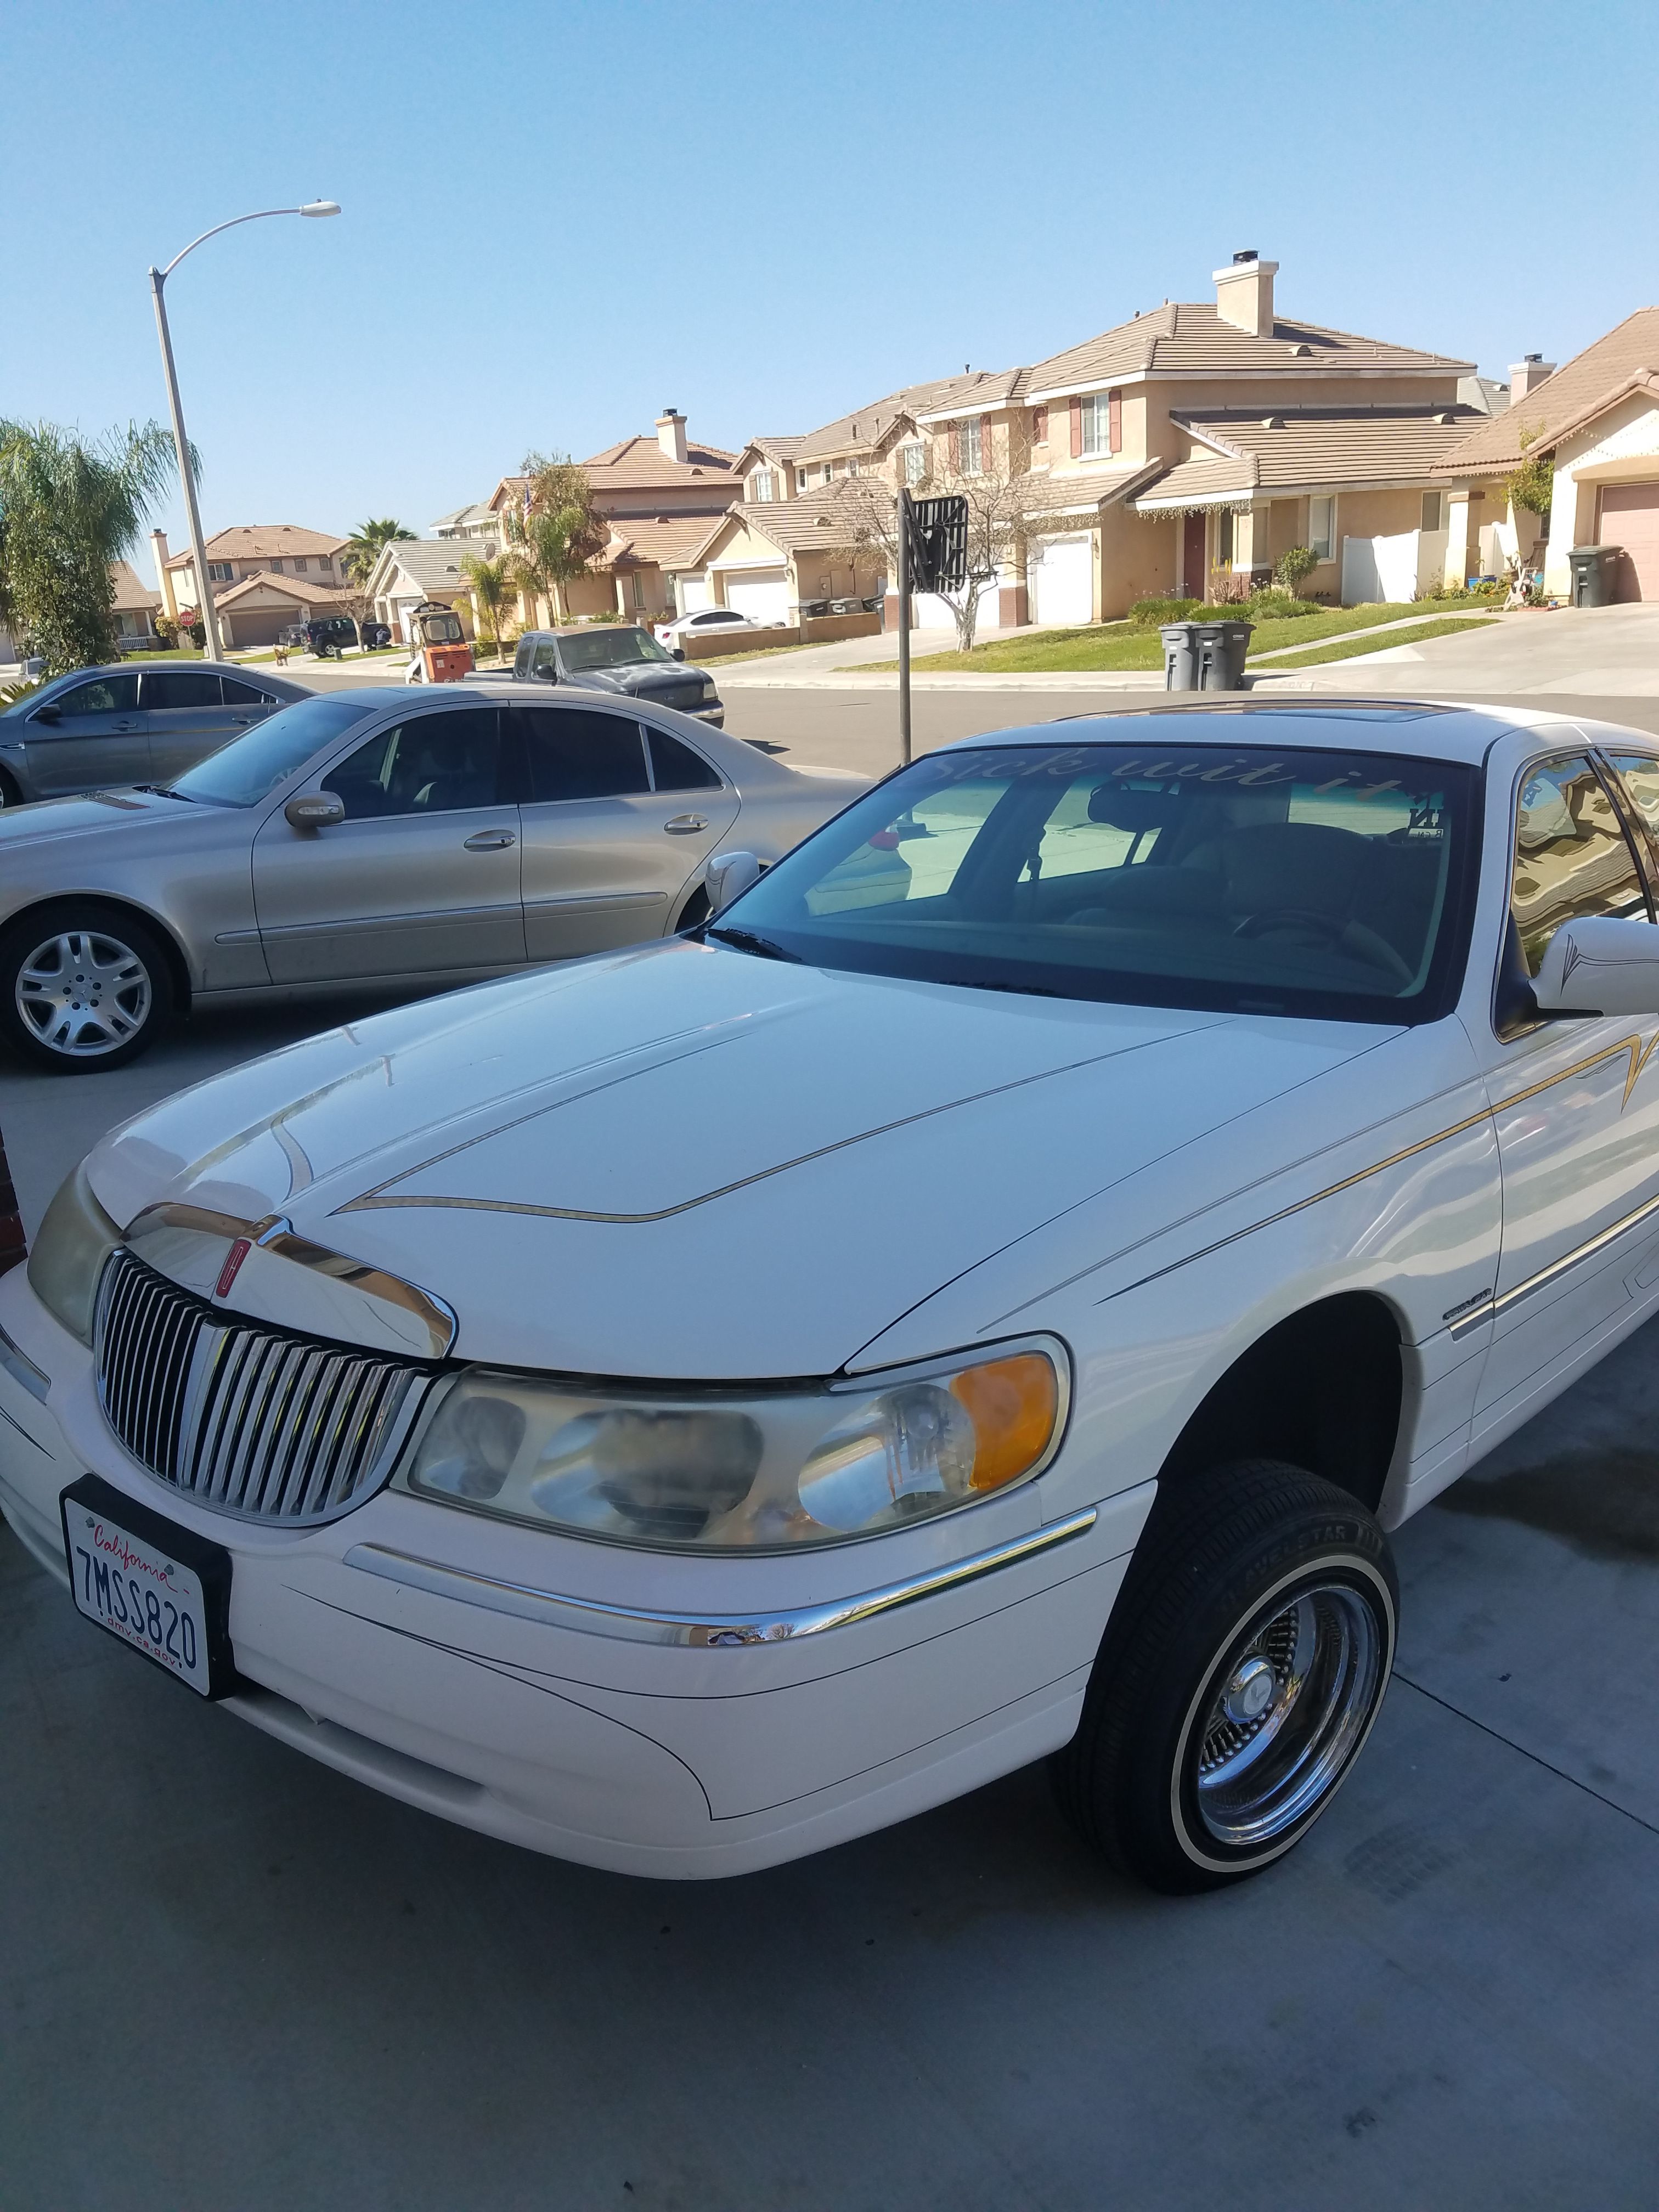 2000 Lincoln Town Car lowrider for Sale in Moreno Valley, CA - OfferUp